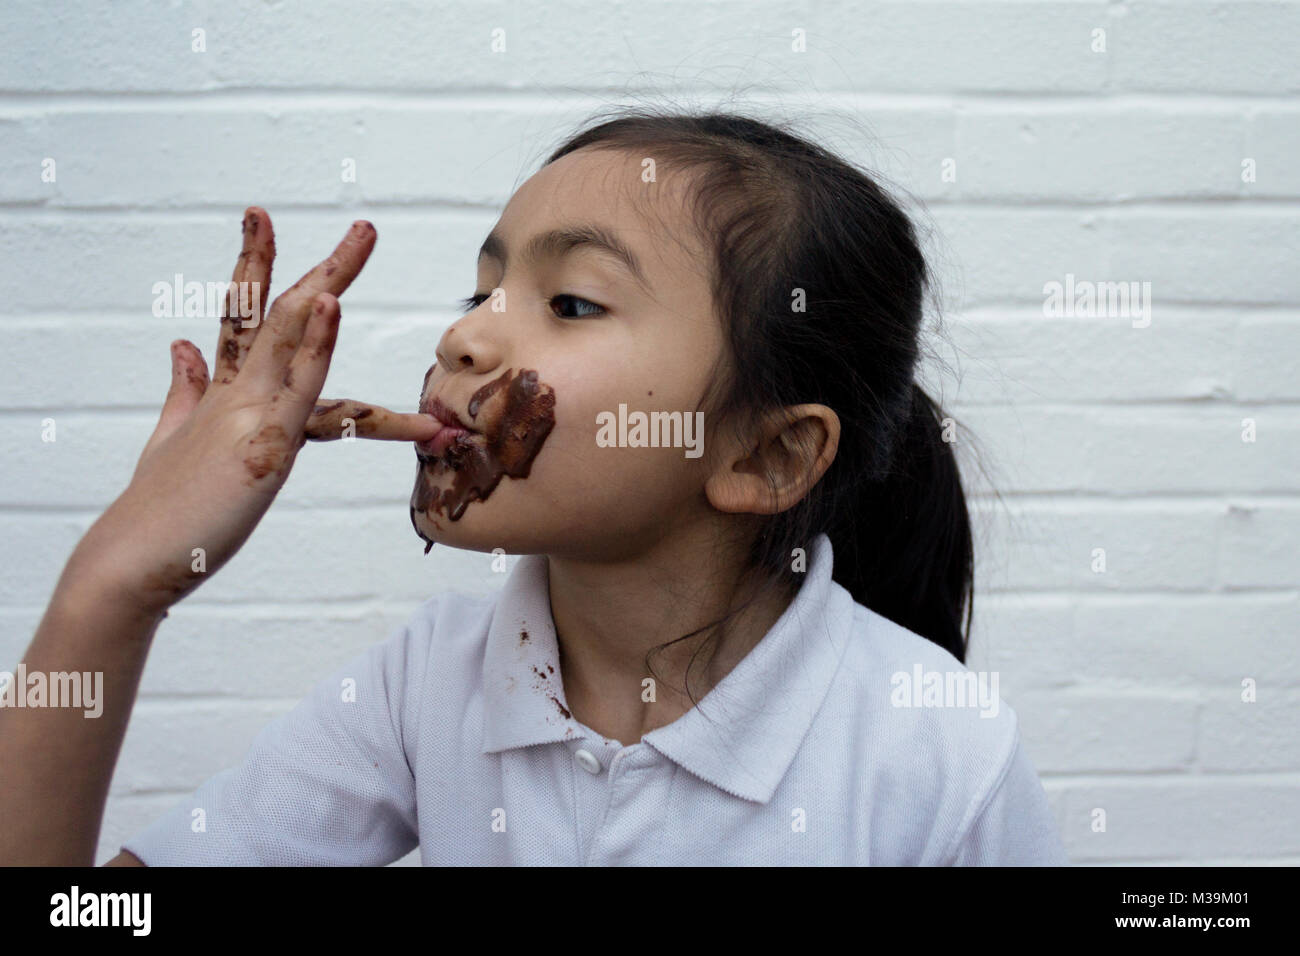 child eating chocolate with mess on face Stock Photo